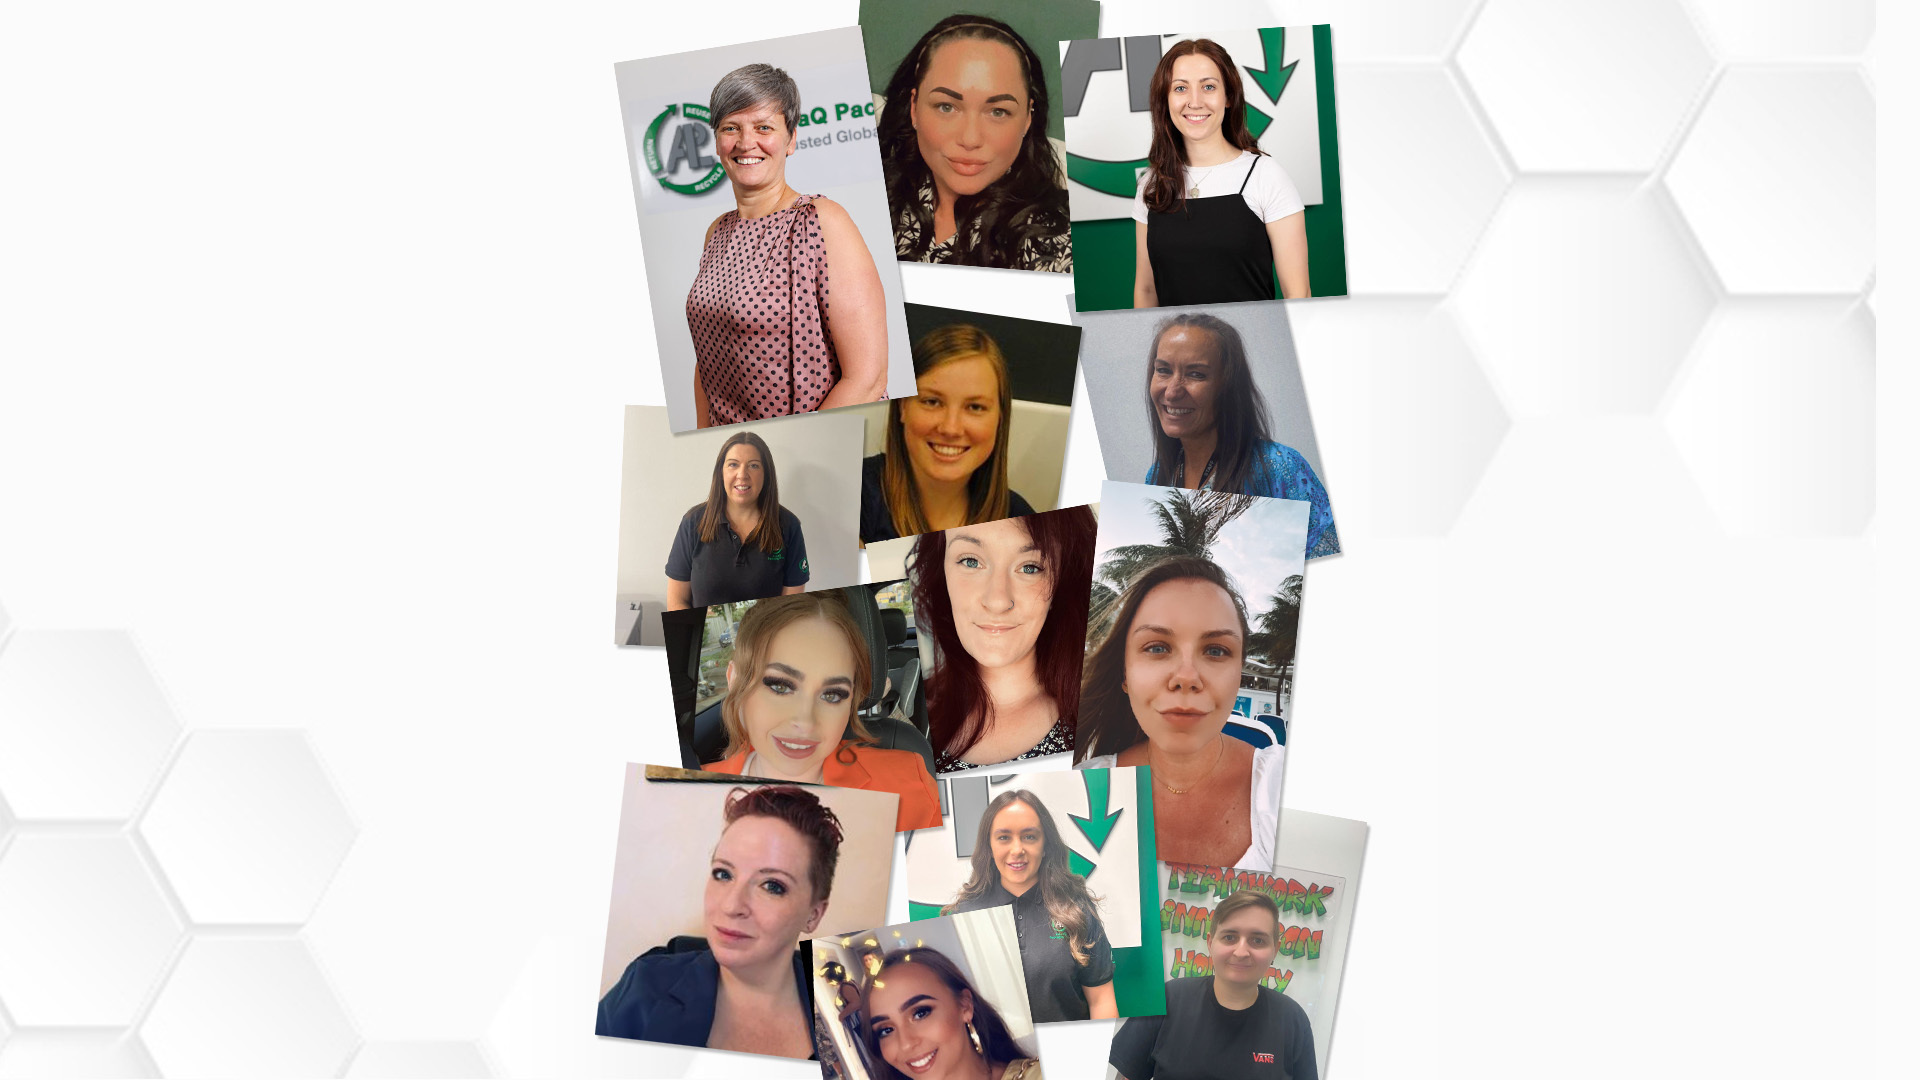 <strong>Meet the ALLpaQ women breaking through the engineering glass ceiling</strong>